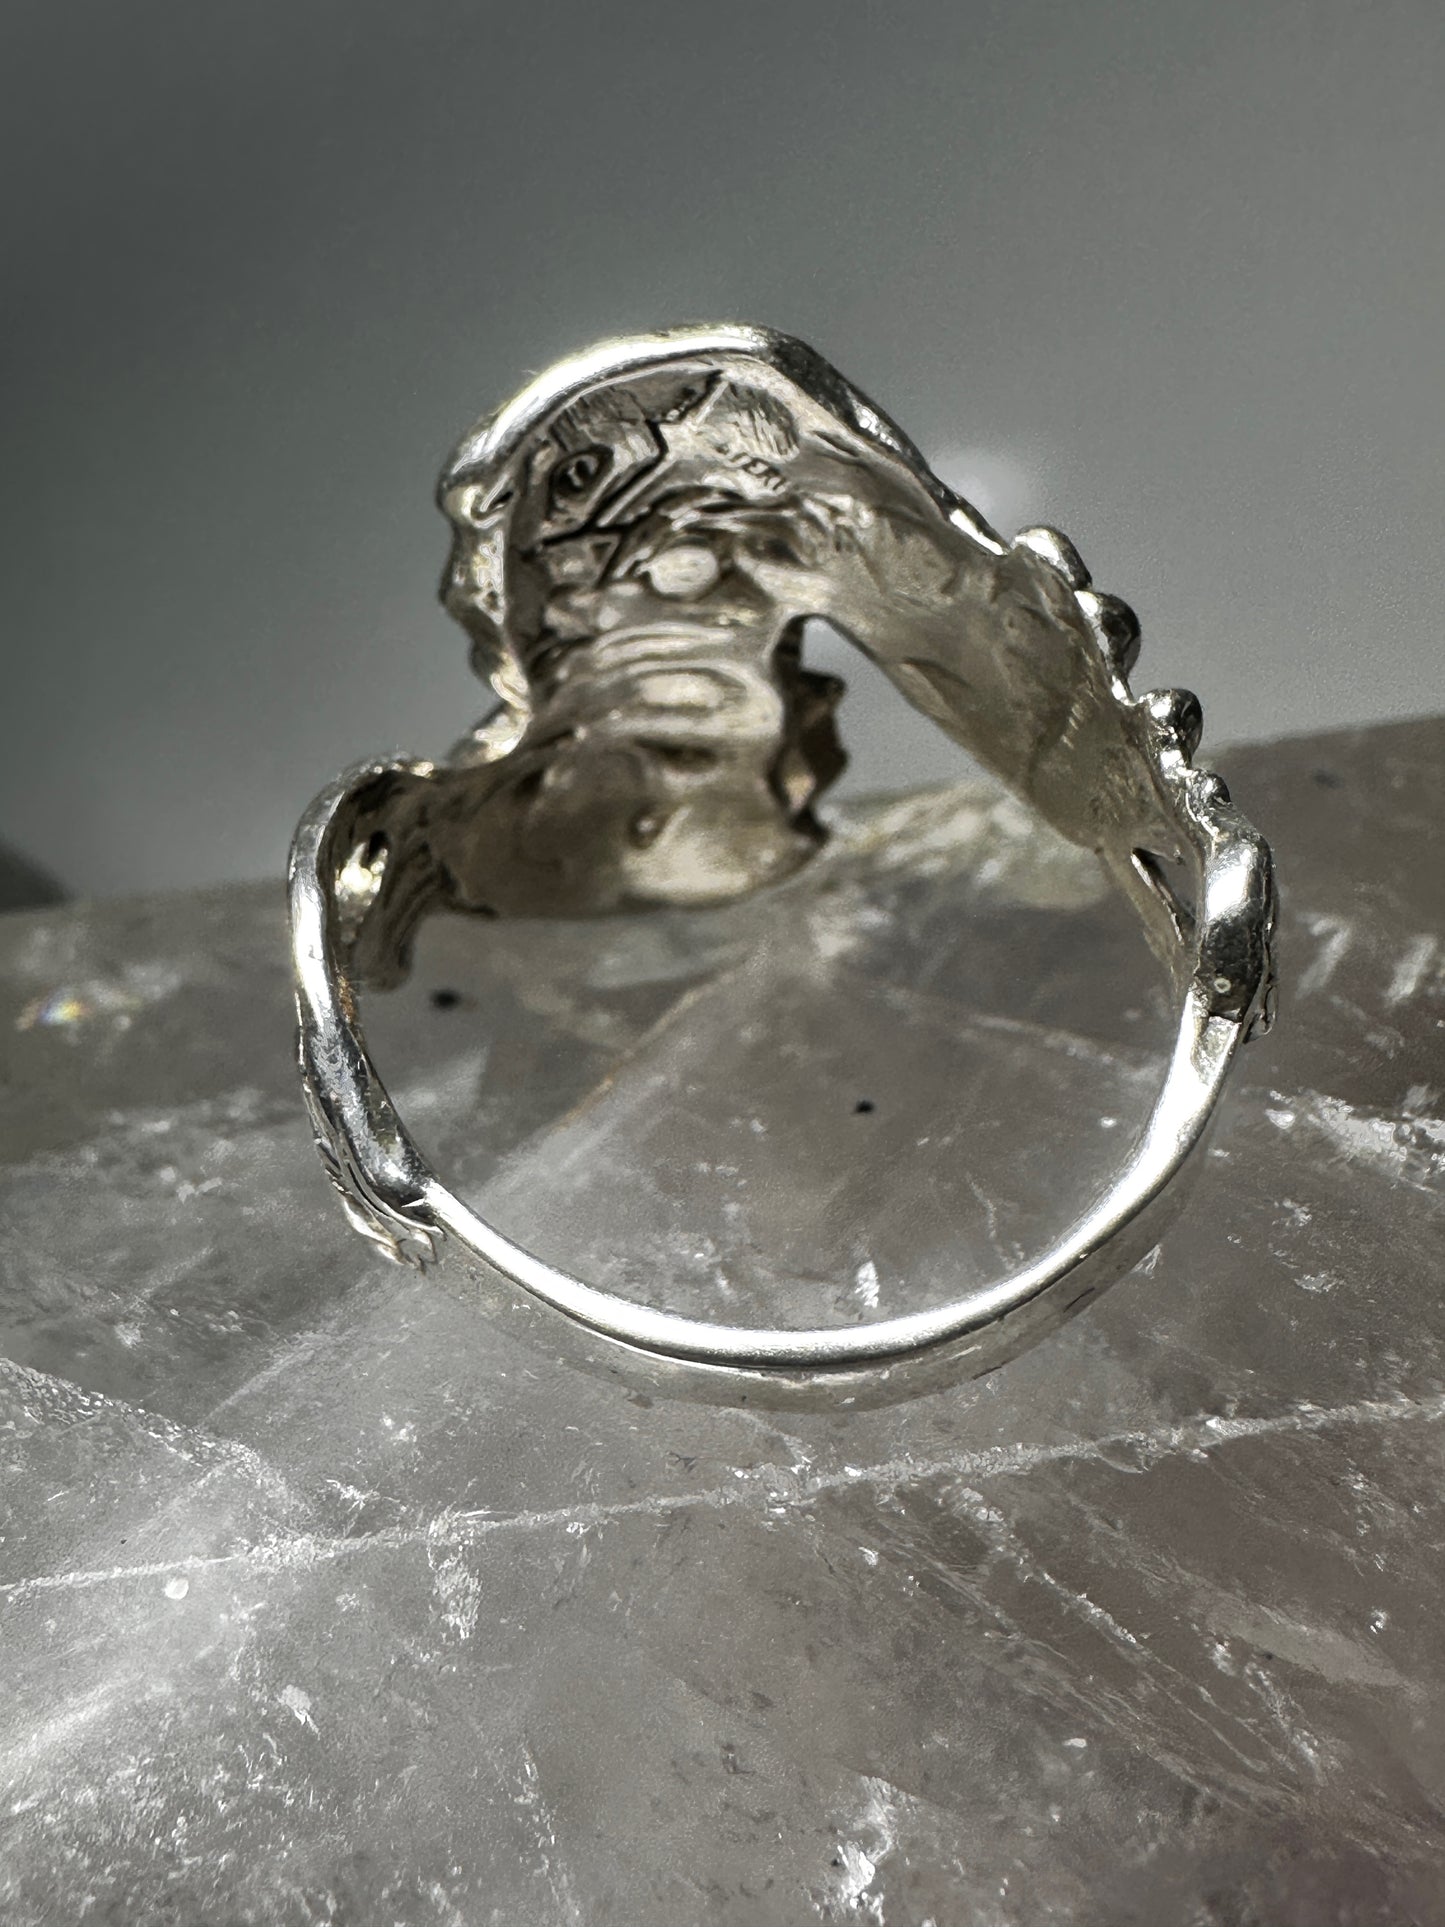 Face ring lady two face double faced size 11 long hair art deco style sterling silver women